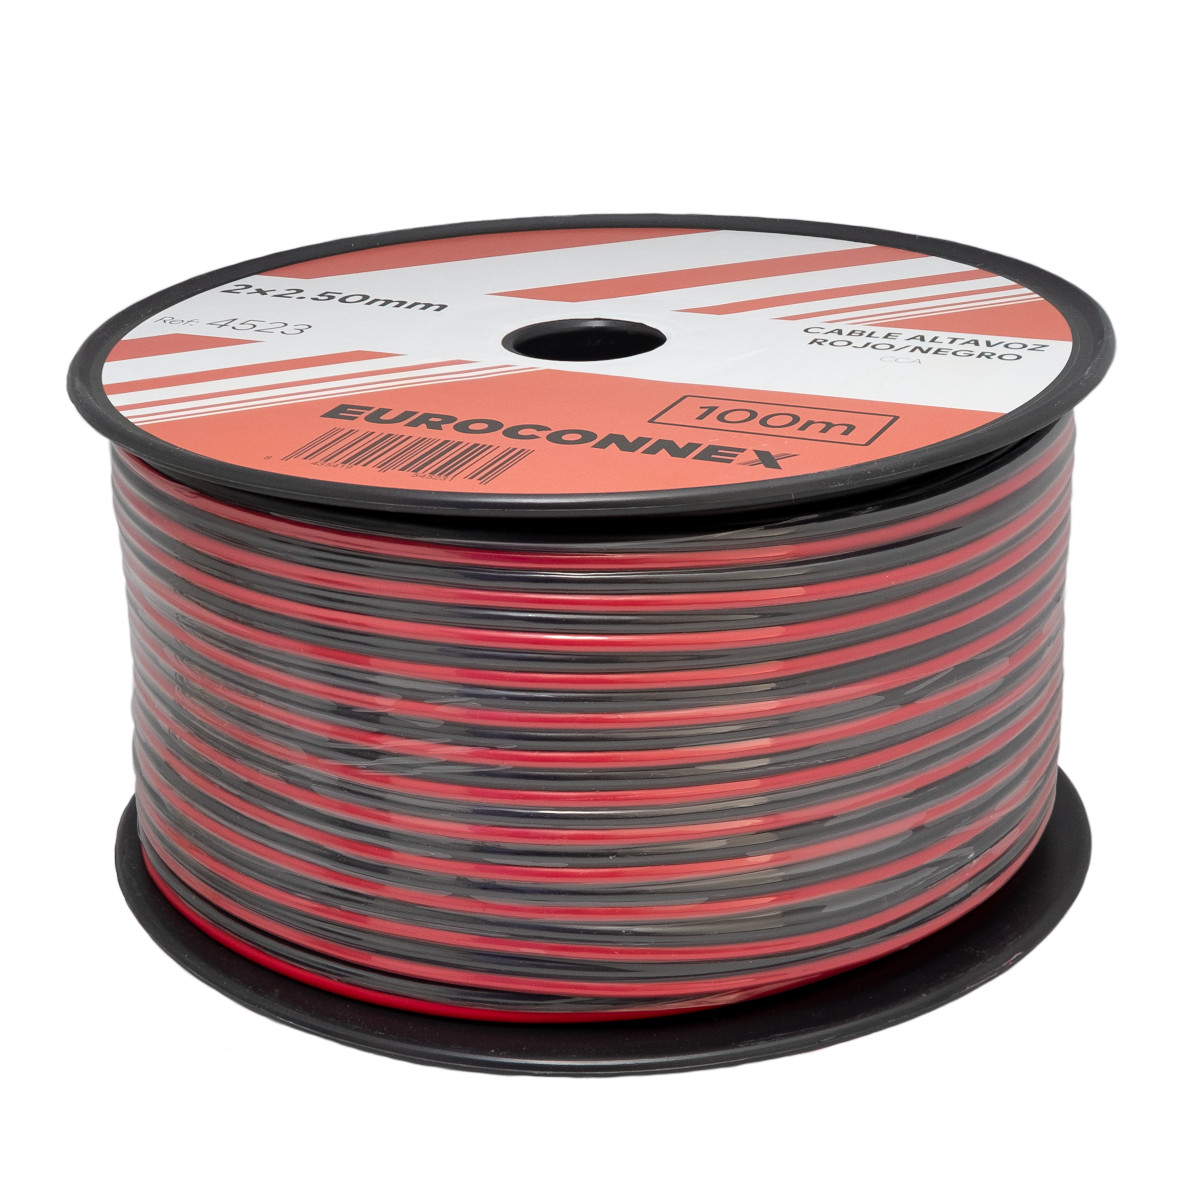 Bicolor Red/Black Speaker Cable 2x2.50mm² CCA, 100m Roll